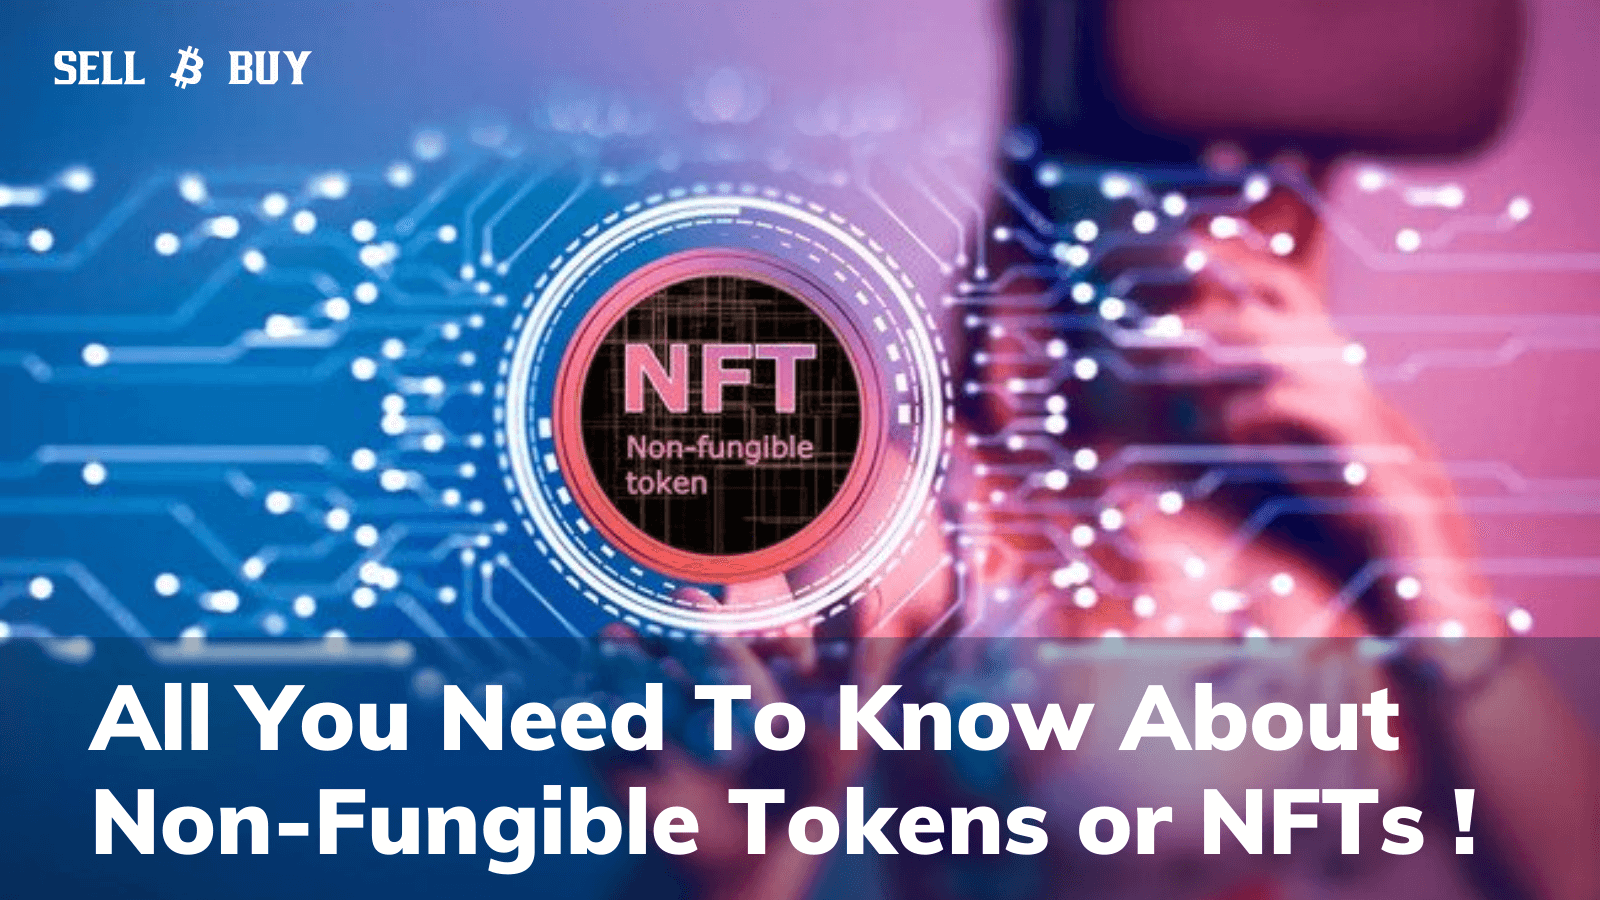 Article about All You Need To Know About Non-Fungible Tokens or NFTs